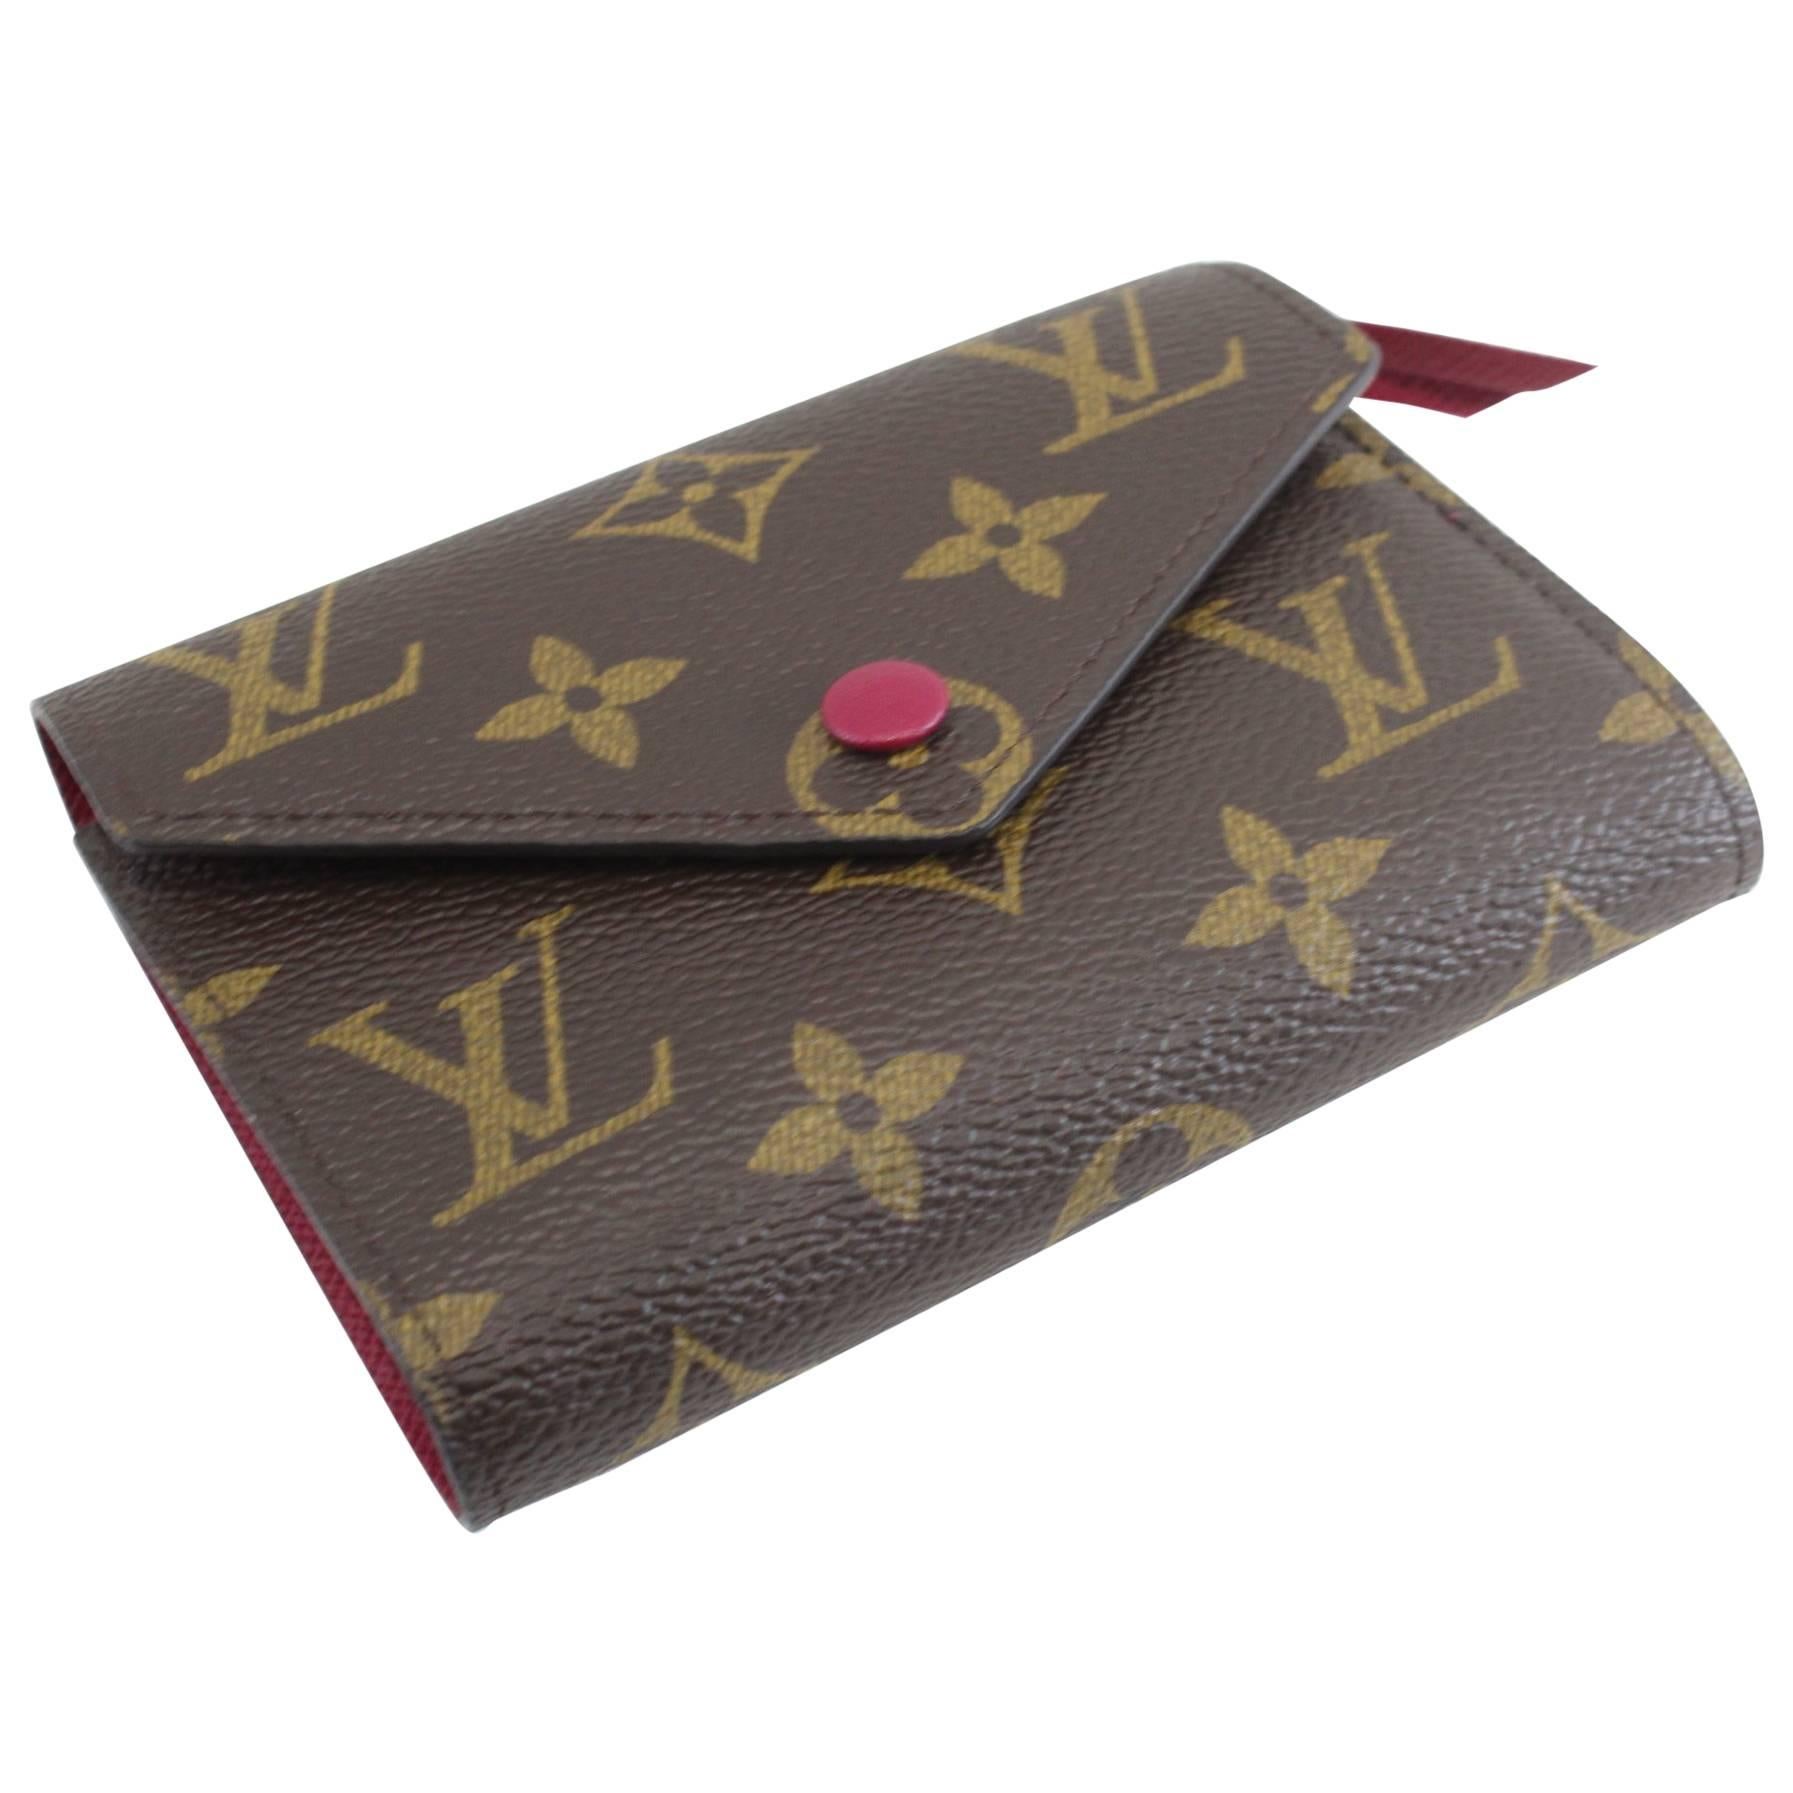 Louis Vuitton Victorine Wallet. New never used